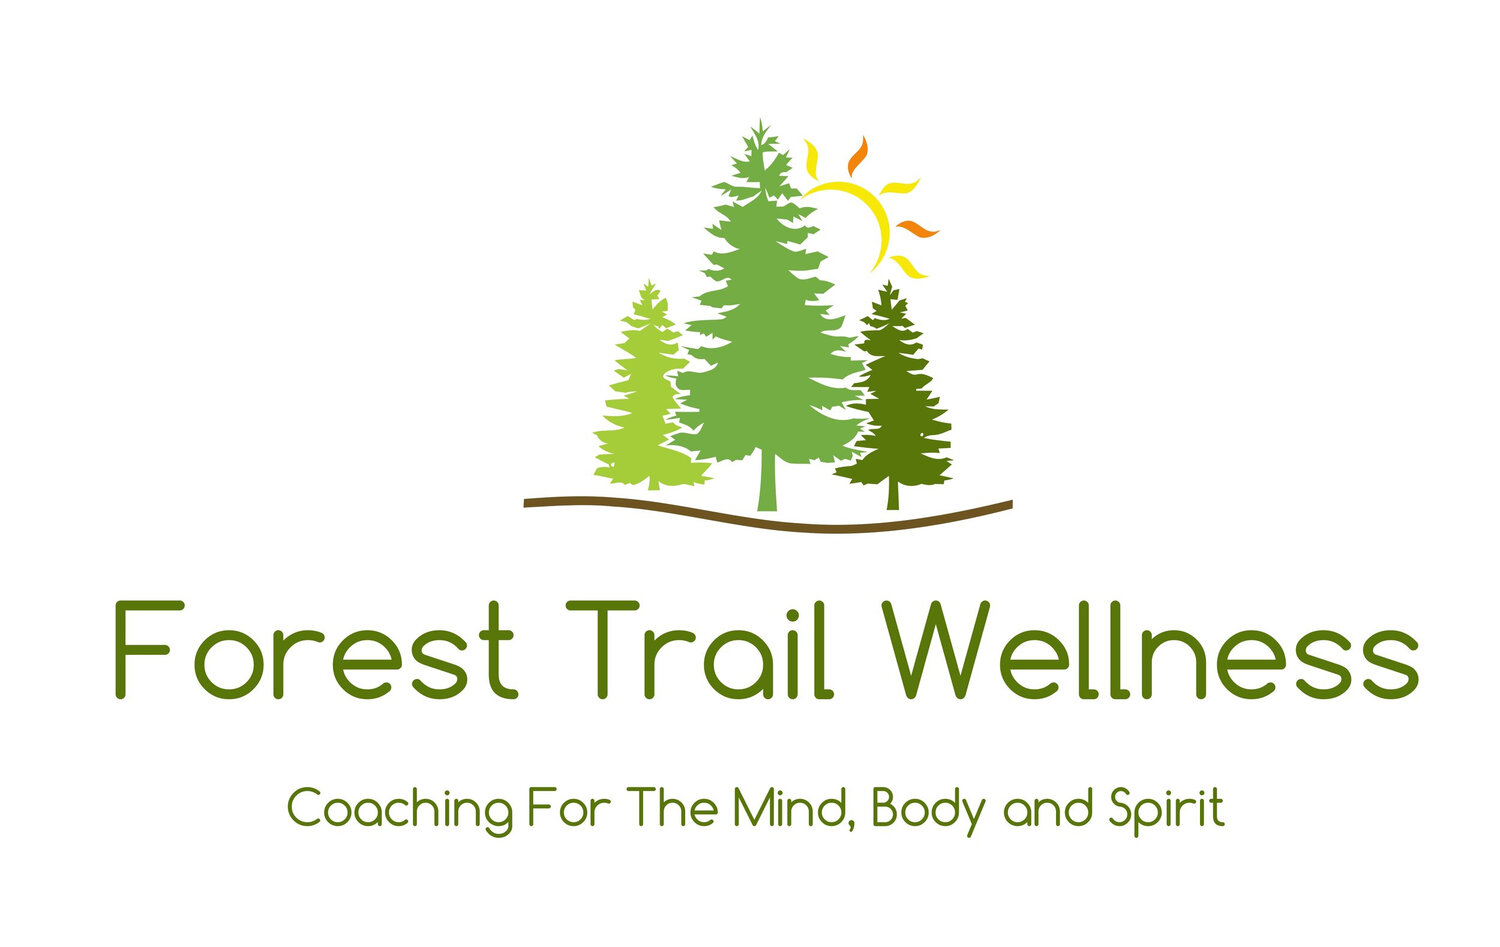 Forest Trail Wellness